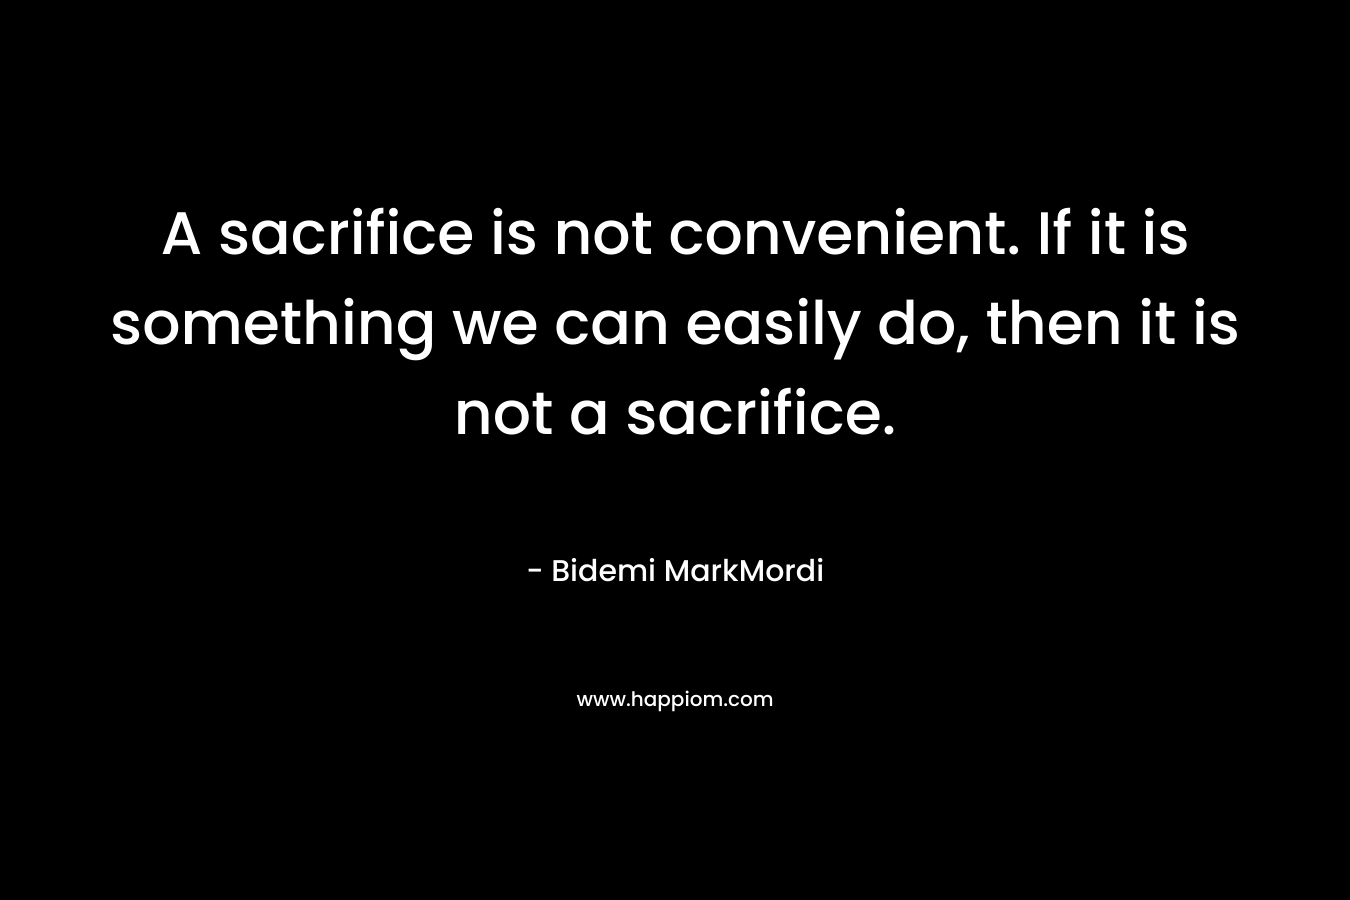 A sacrifice is not convenient. If it is something we can easily do, then it is not a sacrifice. – Bidemi MarkMordi